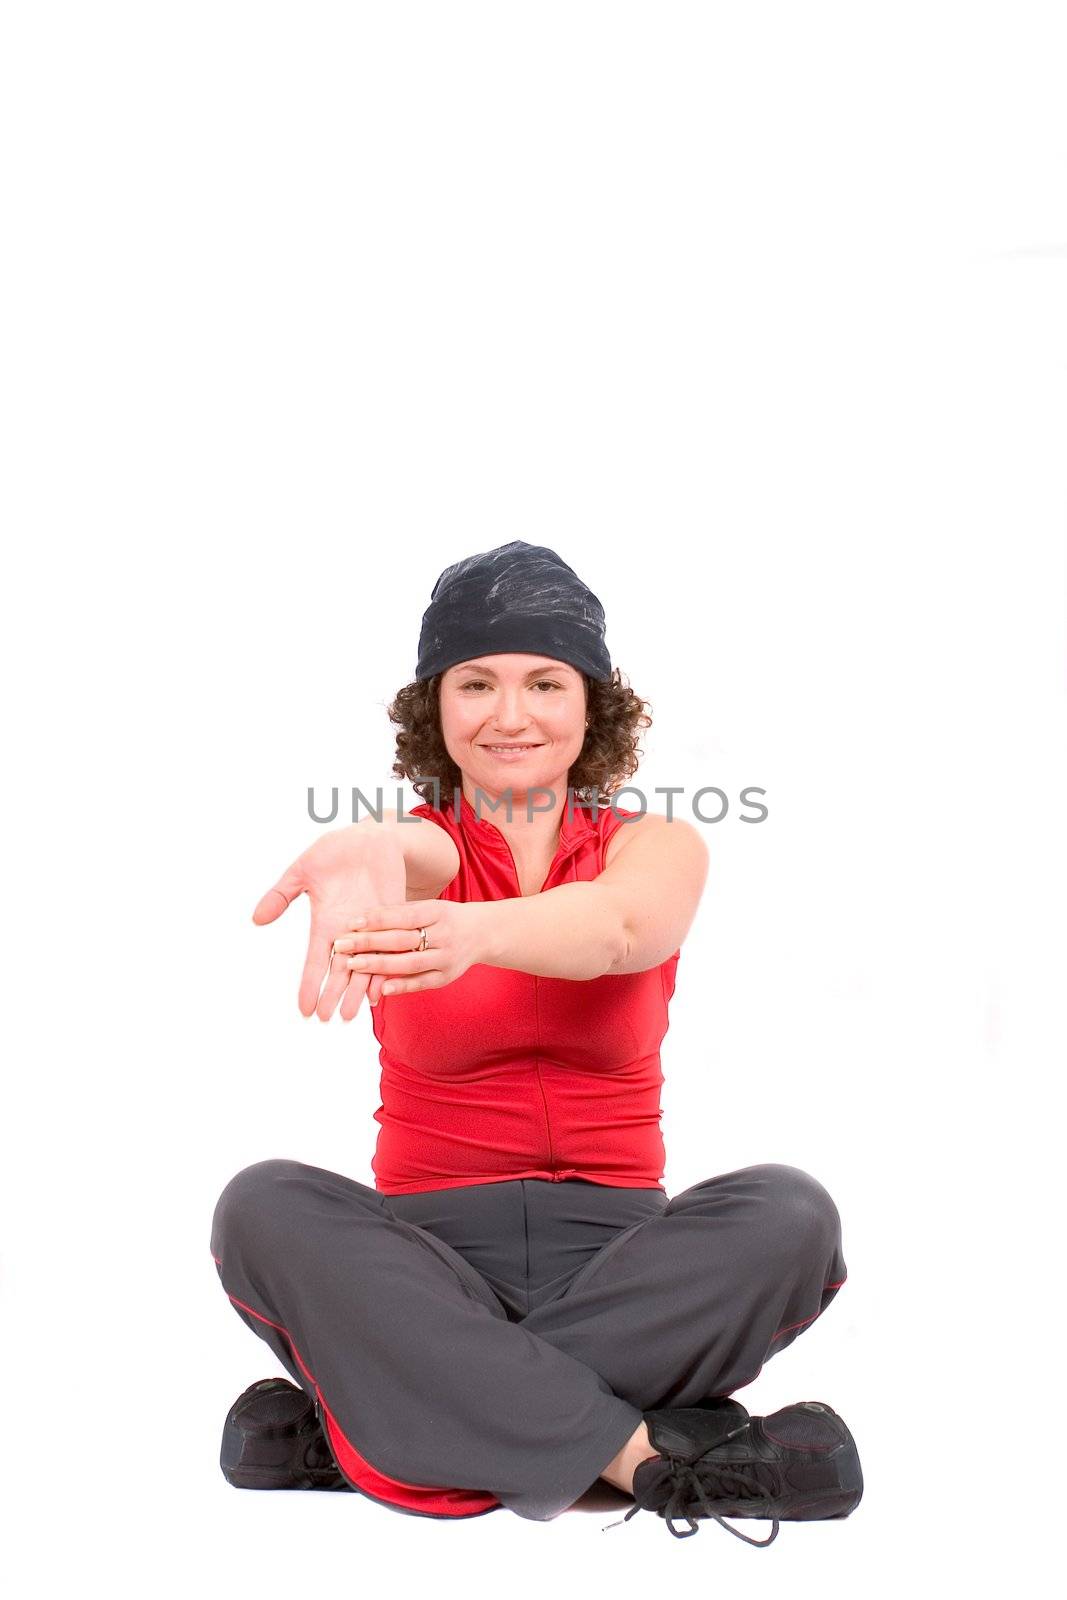 Pretty woman doing an arm stretch while sitting crosslegged on the floor